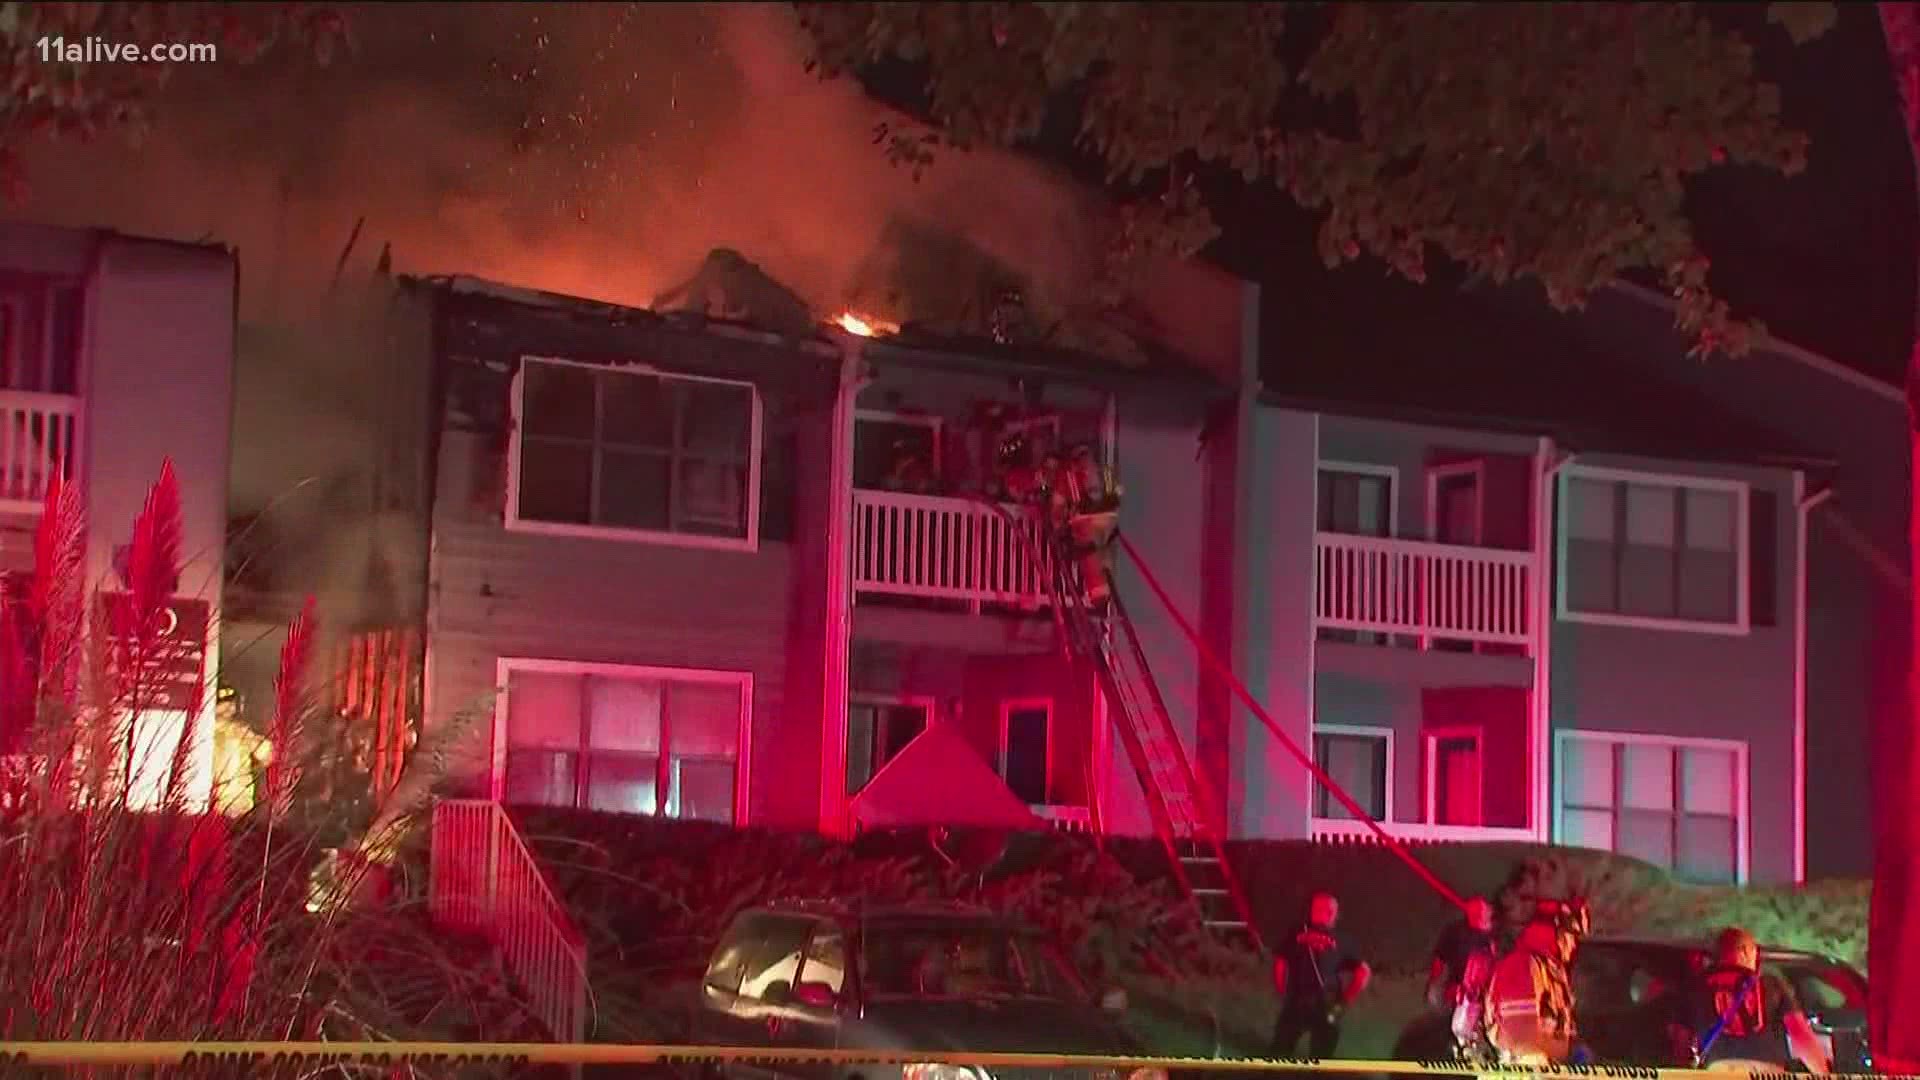 Flames ripped through the roof and rooms of the apartment complex.